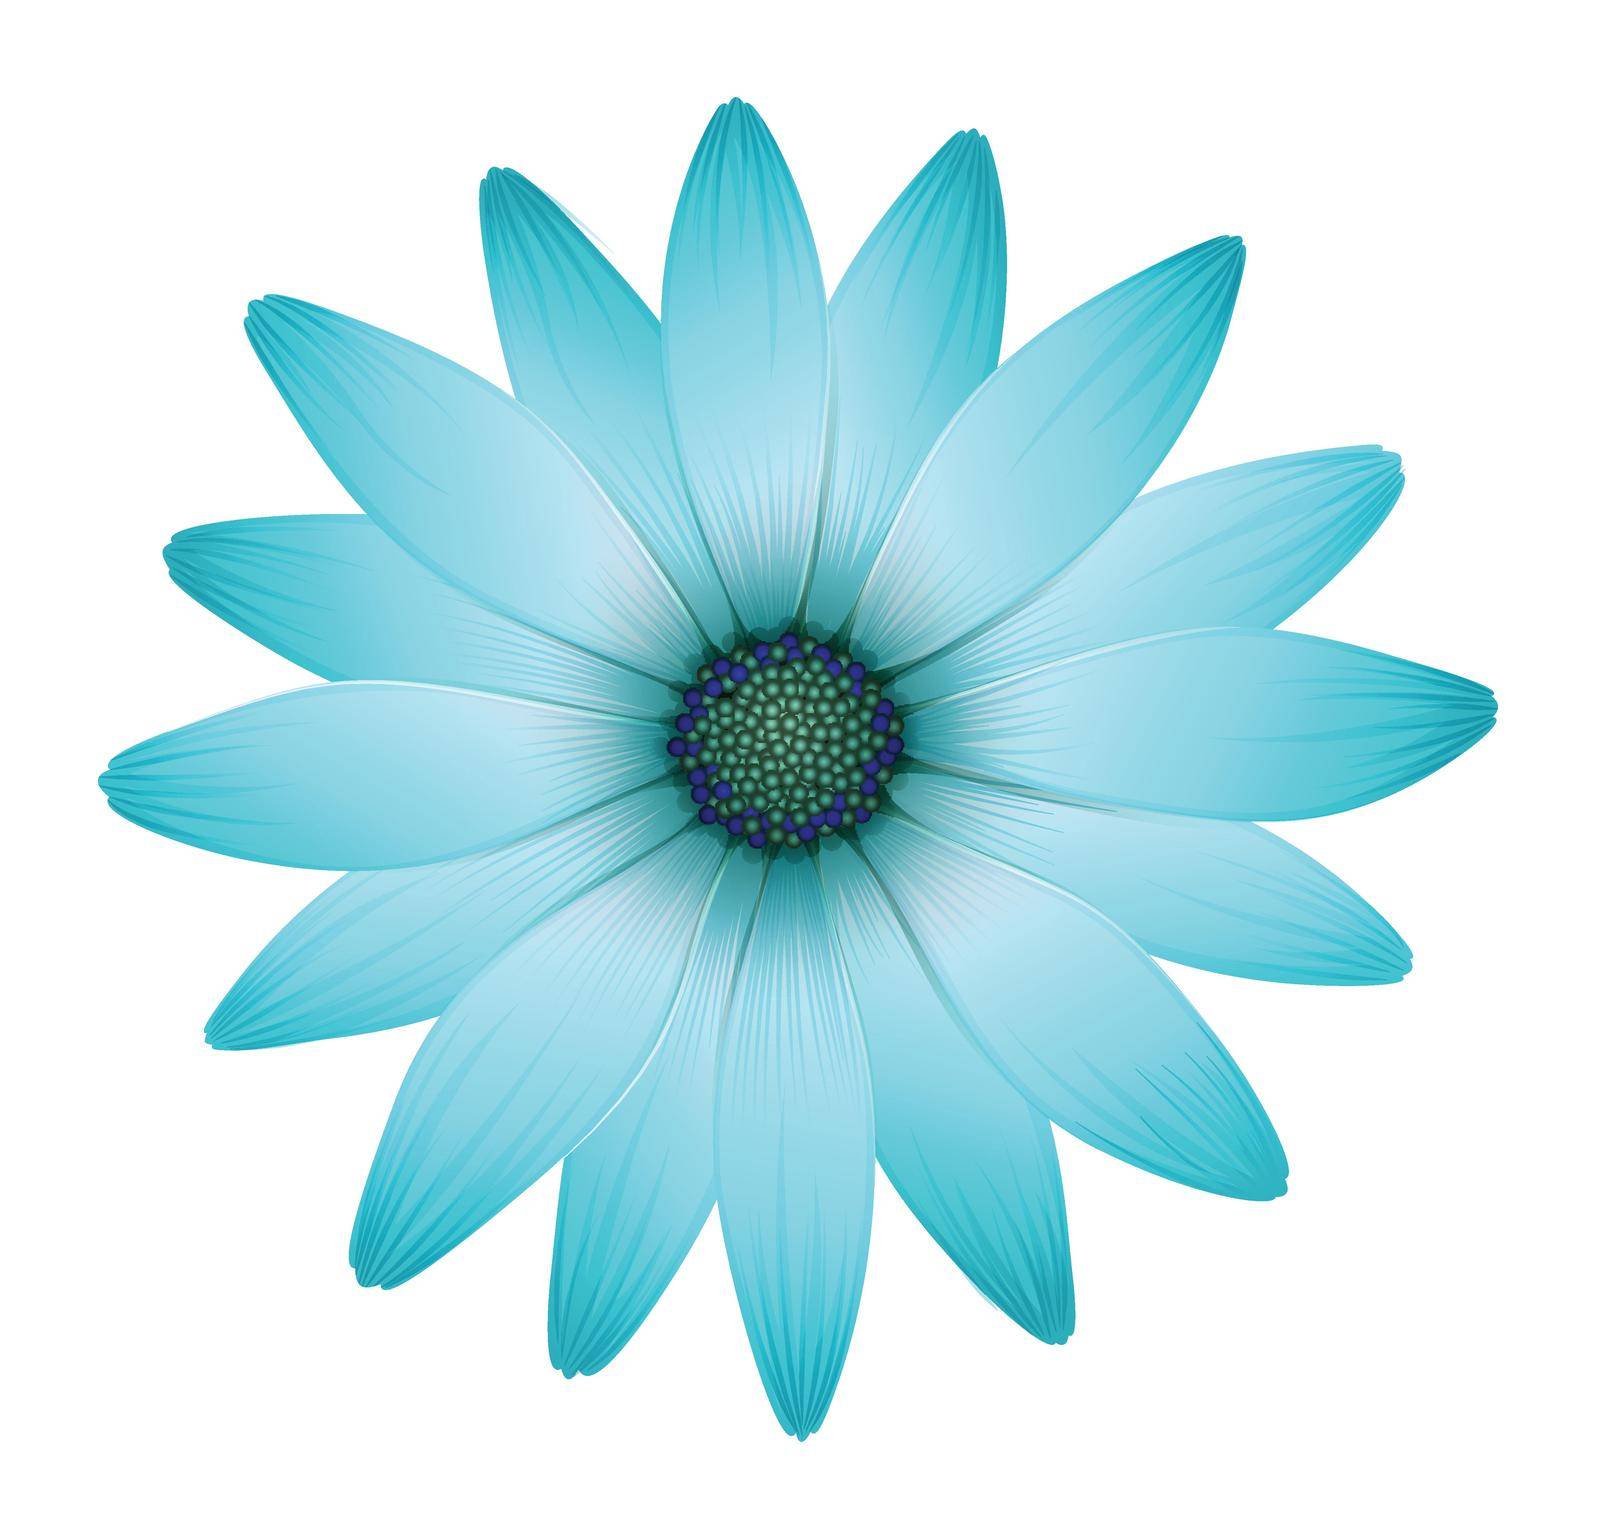 Illustration of a beautiful flower on a white background